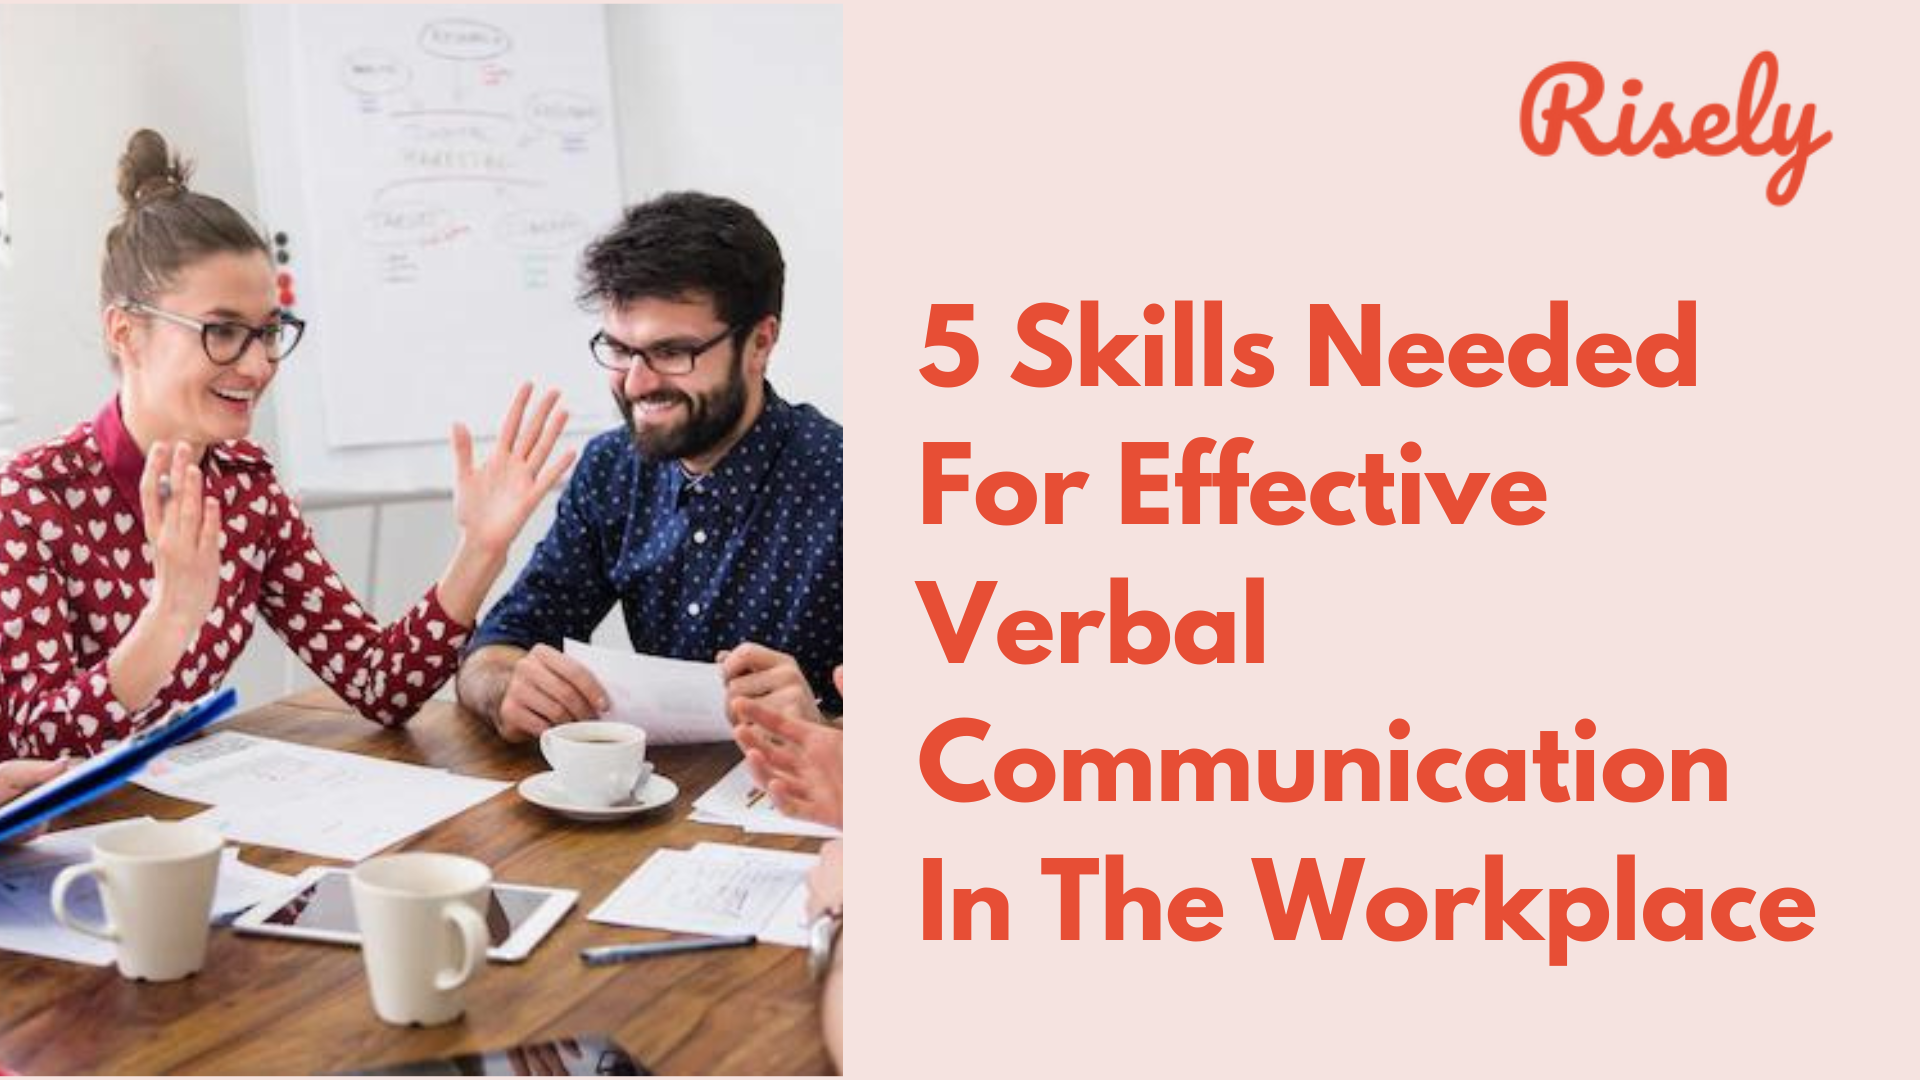 5 Skills Needed For Effective Verbal Communication In The Workplace